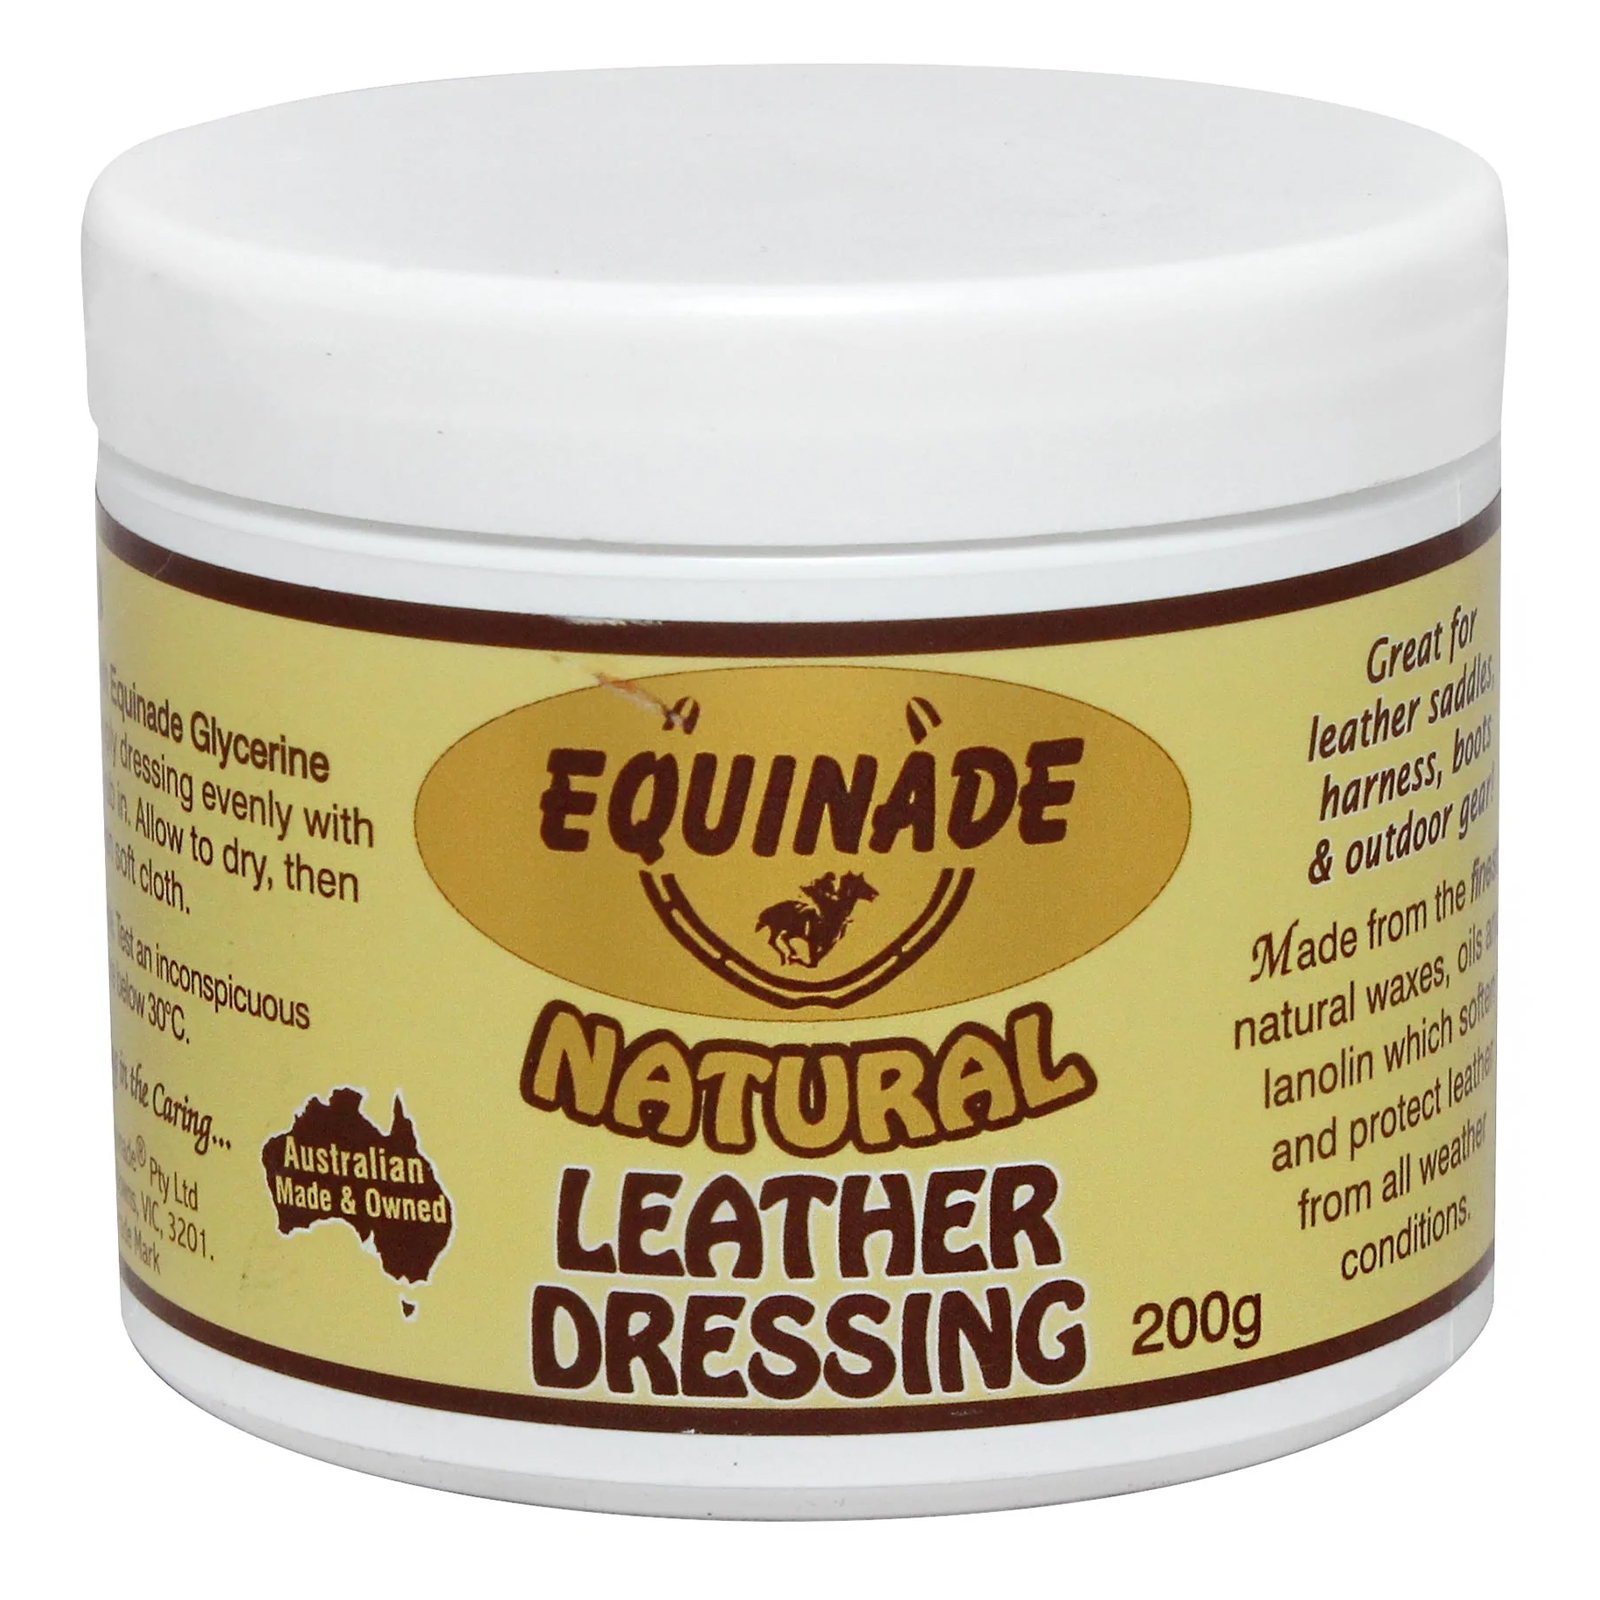 Equinade Natural Leather Dressing for Horse